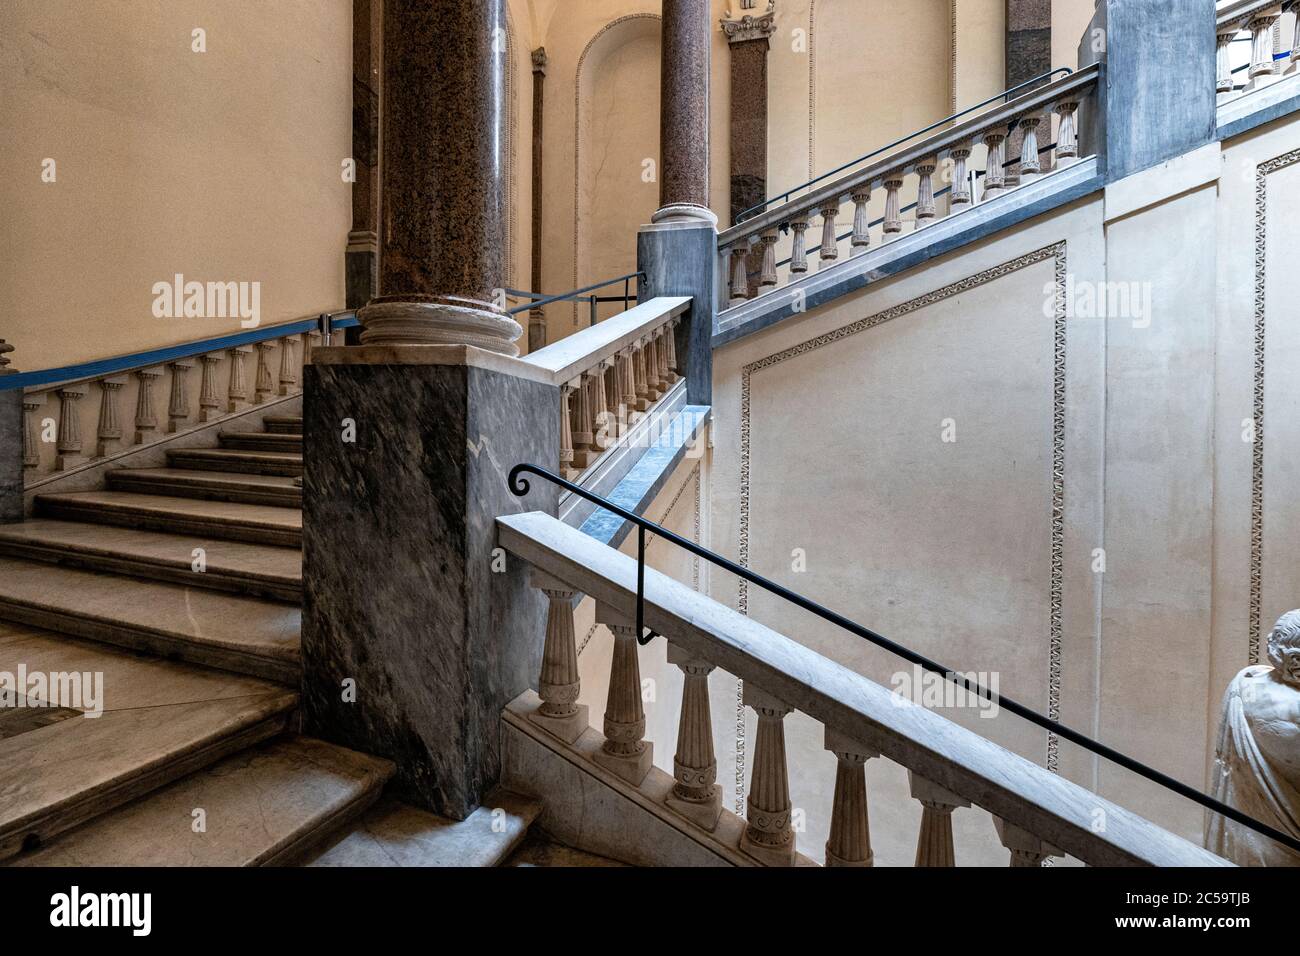 Italy Lazio Palazzo Braschi in Rome: the elegant monumental staircase probably by Valadier, adorned with ancient statues and stuccos Stock Photo